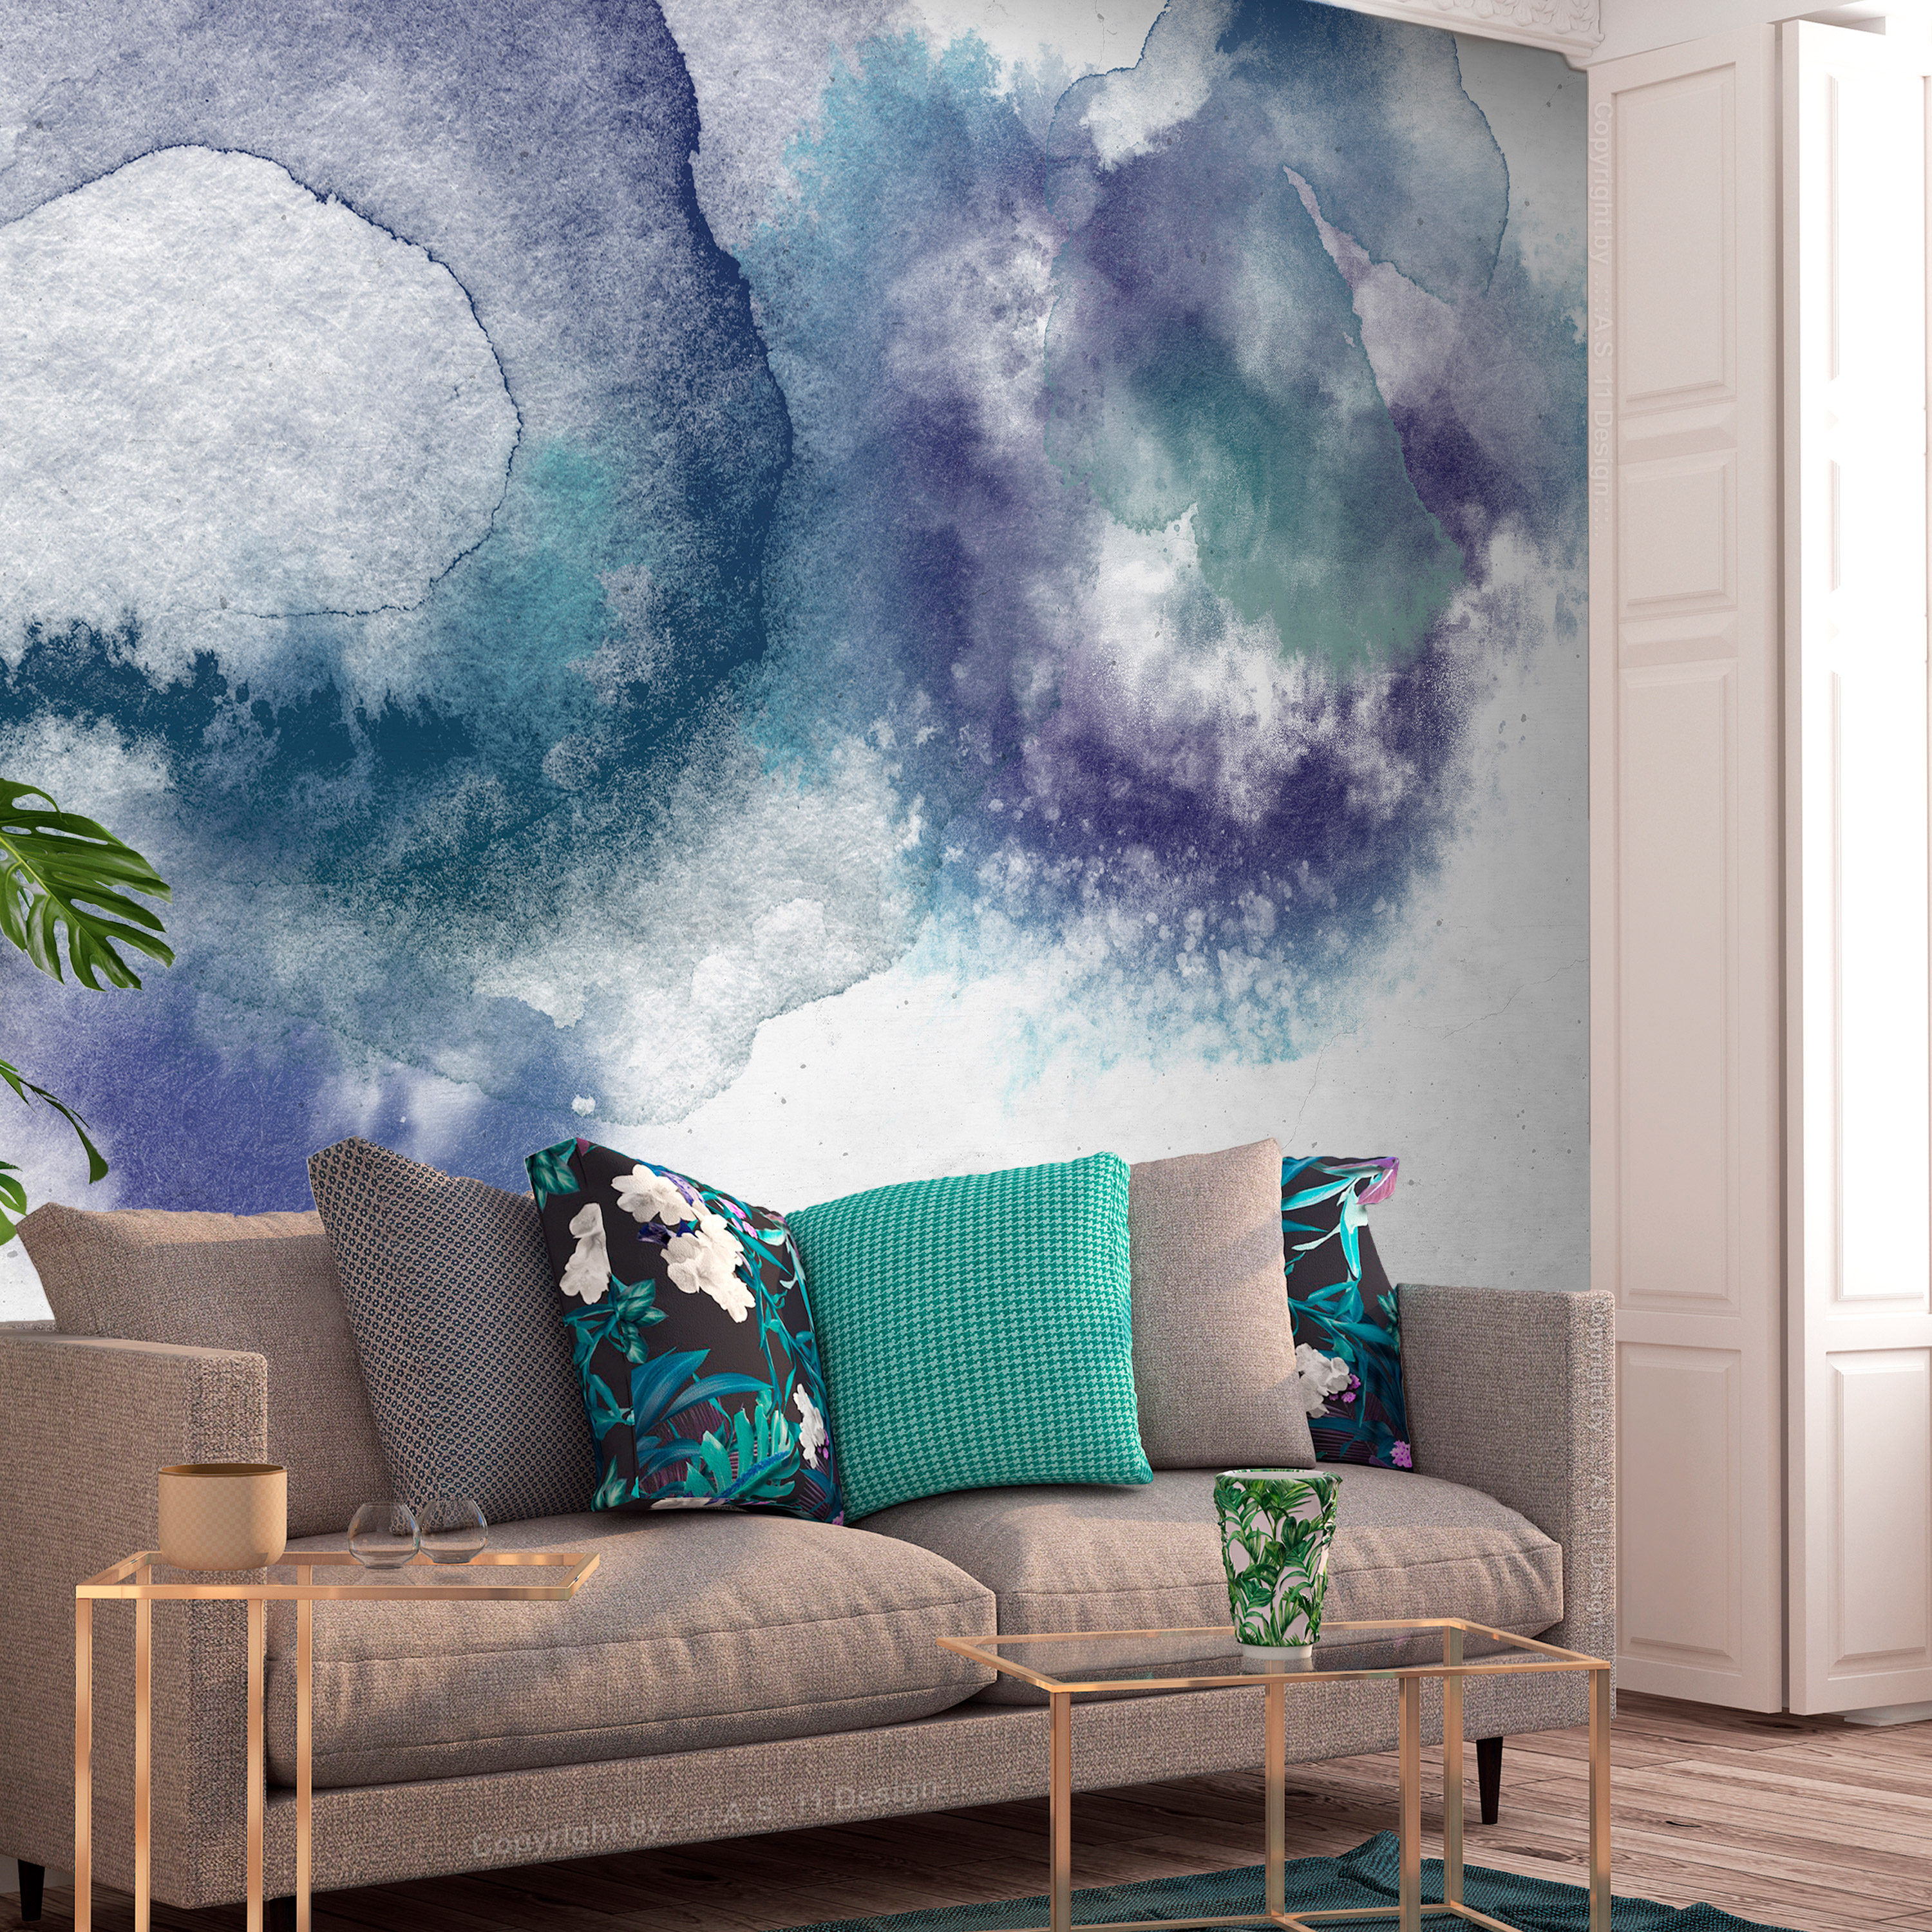 Self-adhesive Wallpaper - Painted Mirages - Second Variant - 196x140